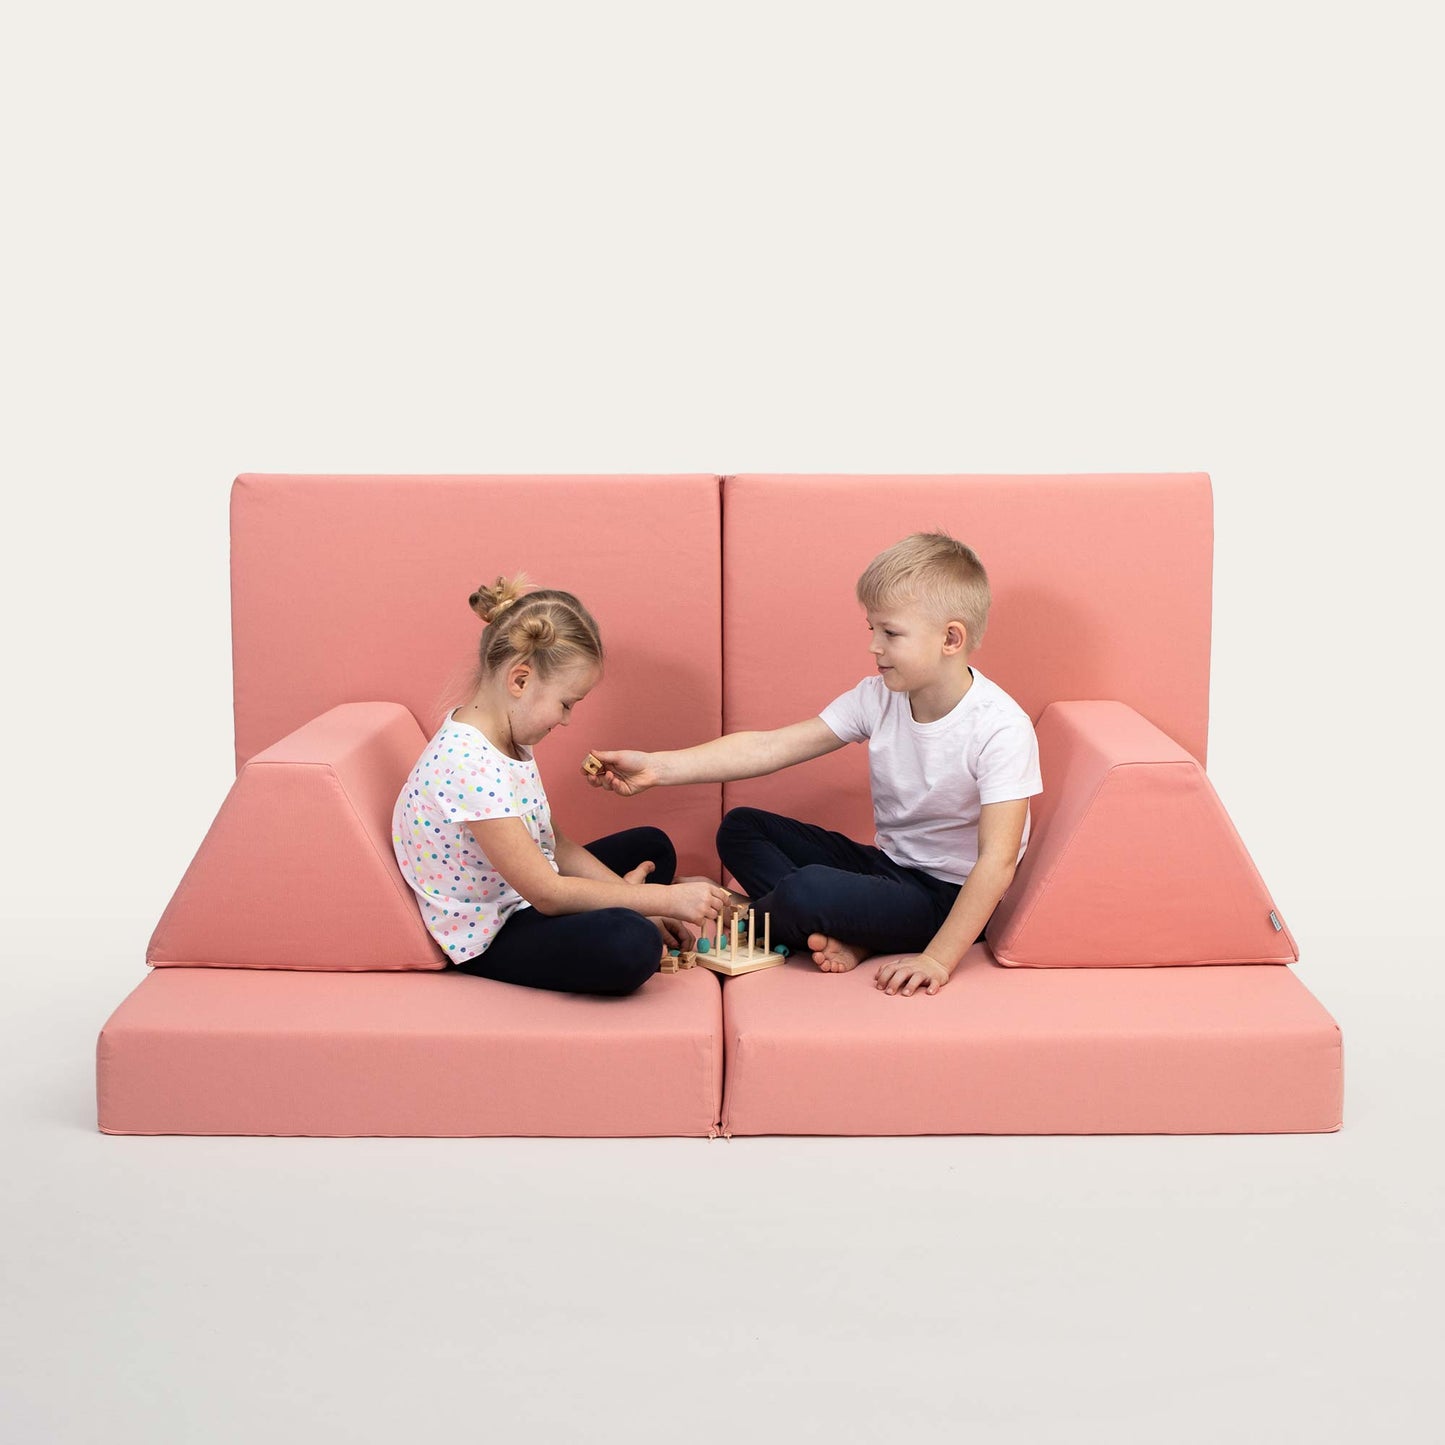 A boy and a girl playing on their Salmon pink Monboxy activity couch